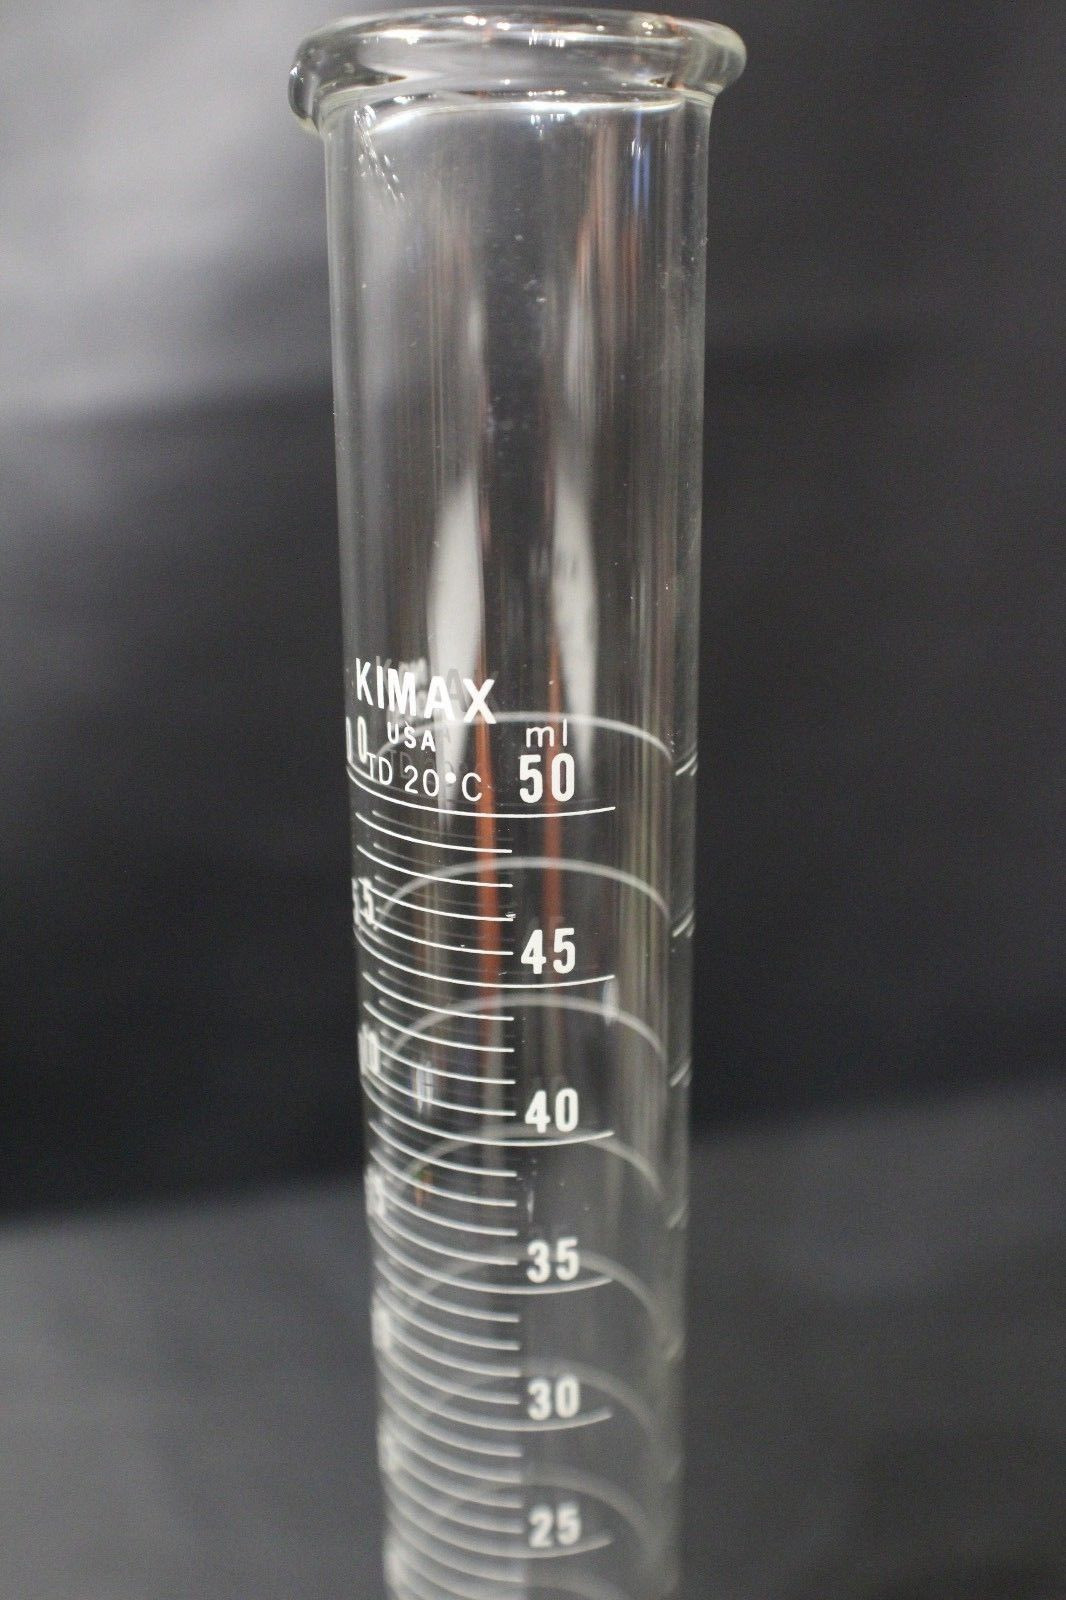 18 Famous 20 Inch Plastic Cylinder Vases 2024 free download 20 inch plastic cylinder vases of kimble kimax 250ml hex base graduated cylinder no 20030 ebay within s l1600